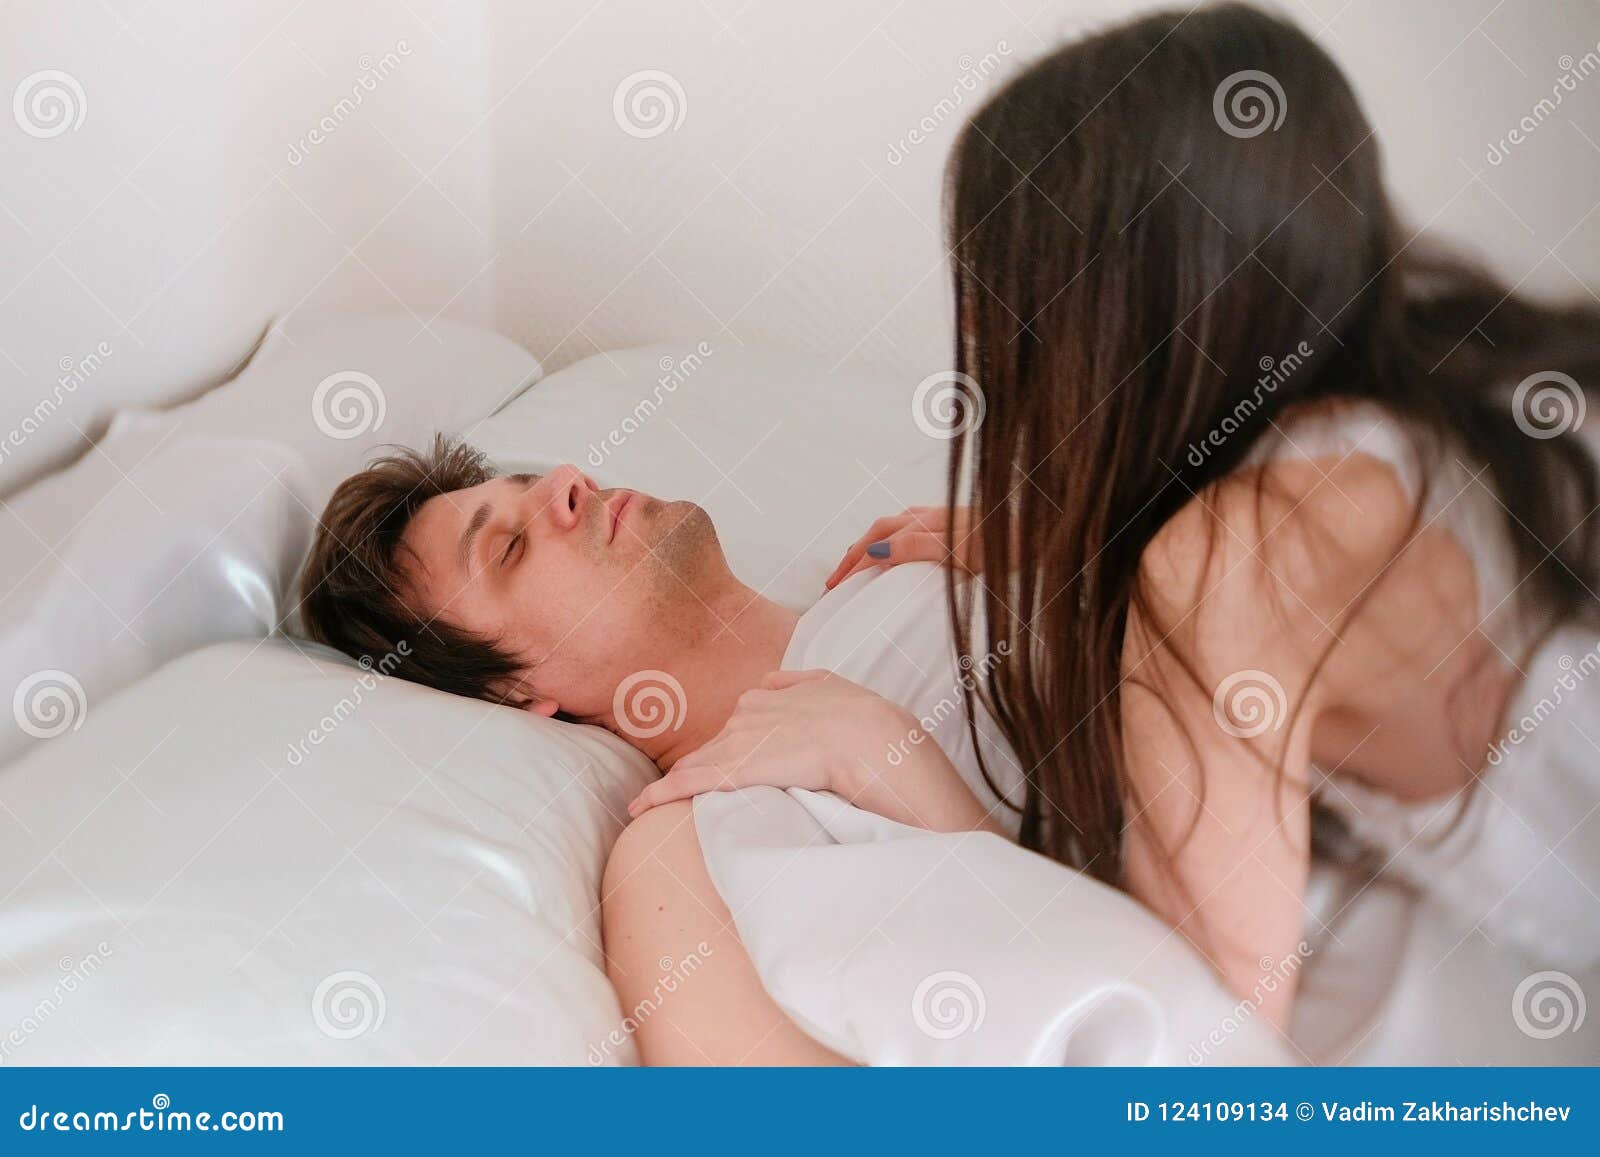 Husband and Wife Have Sex in the Morning image